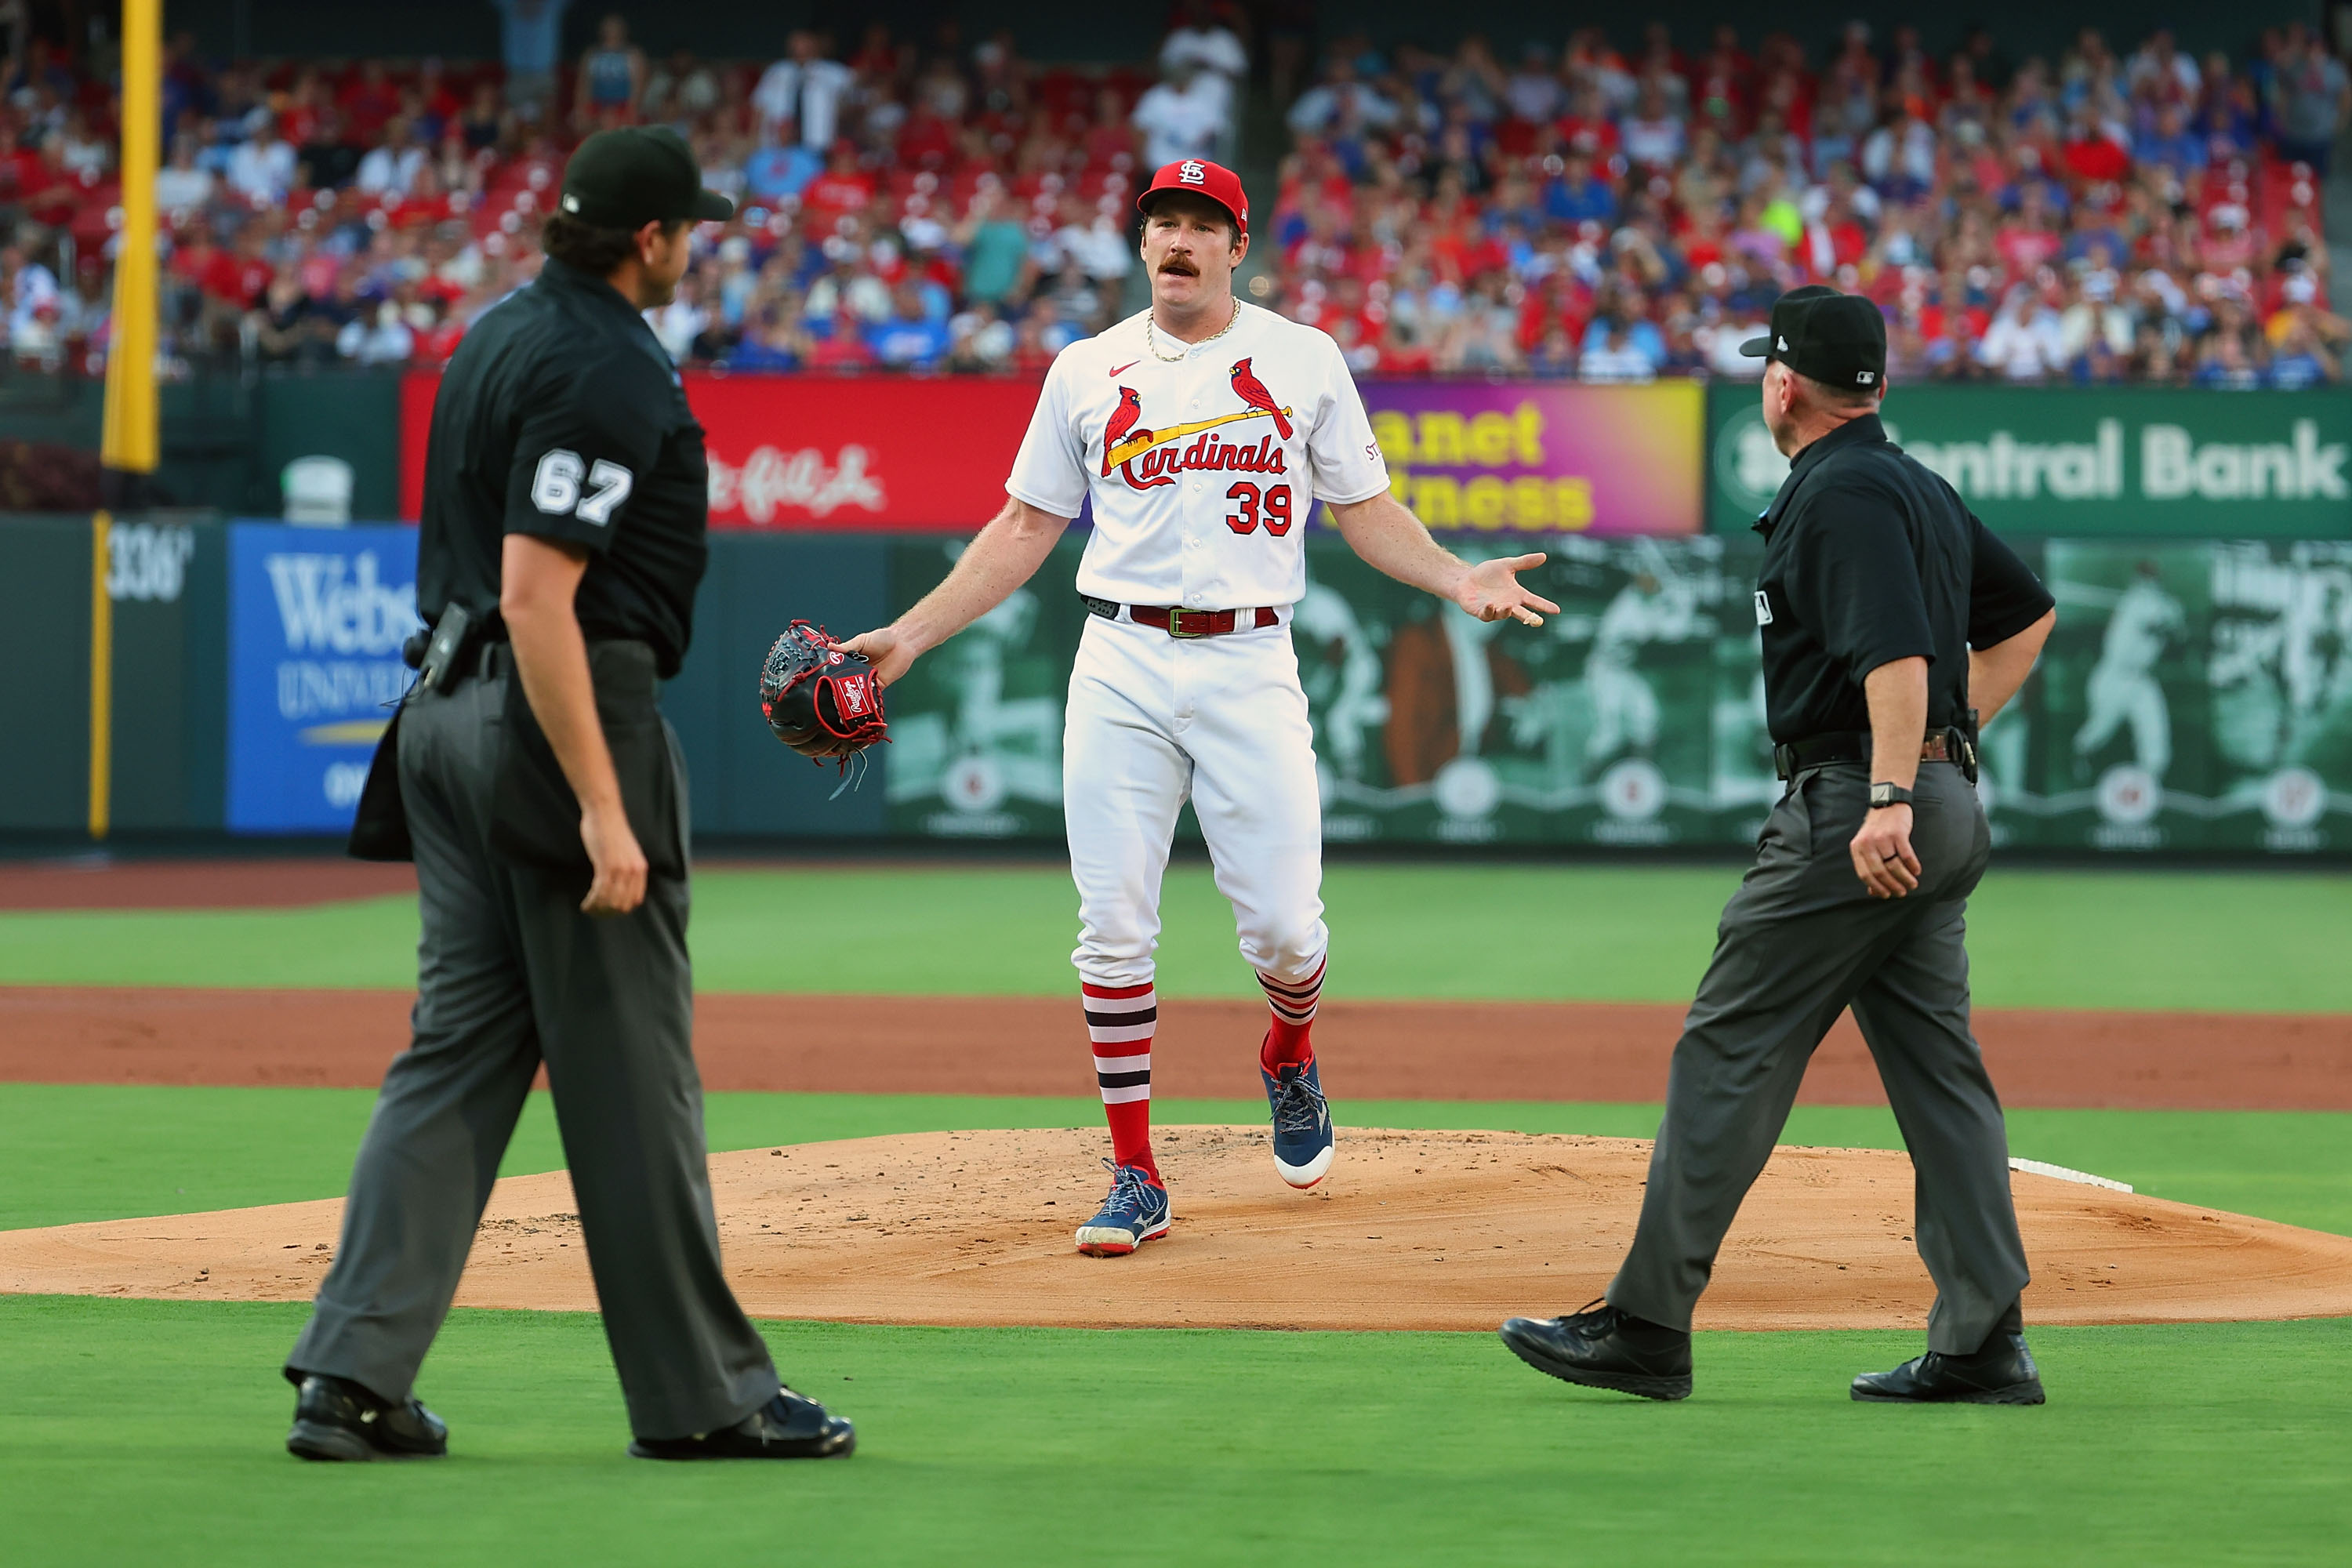 MLB fans react to Cardinals' starter getting ejected after hitting Ian